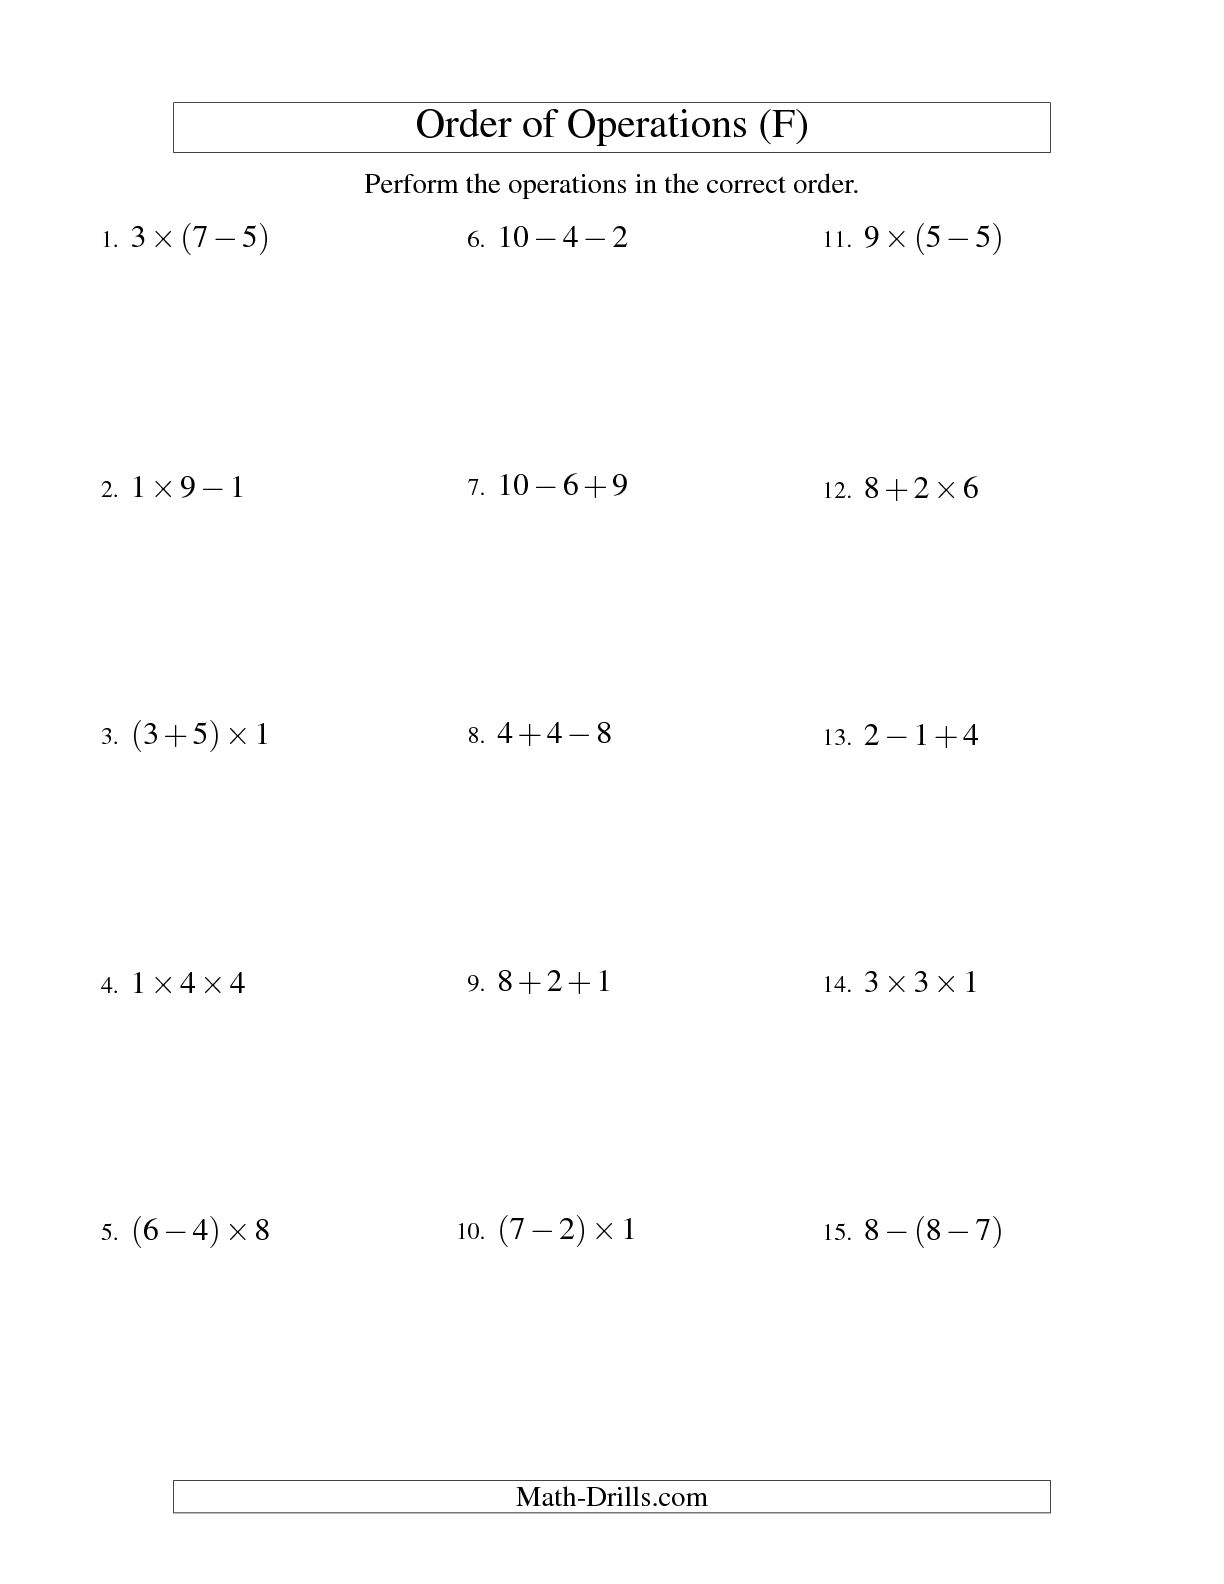 Adding and Subtracting Integers Worksheet